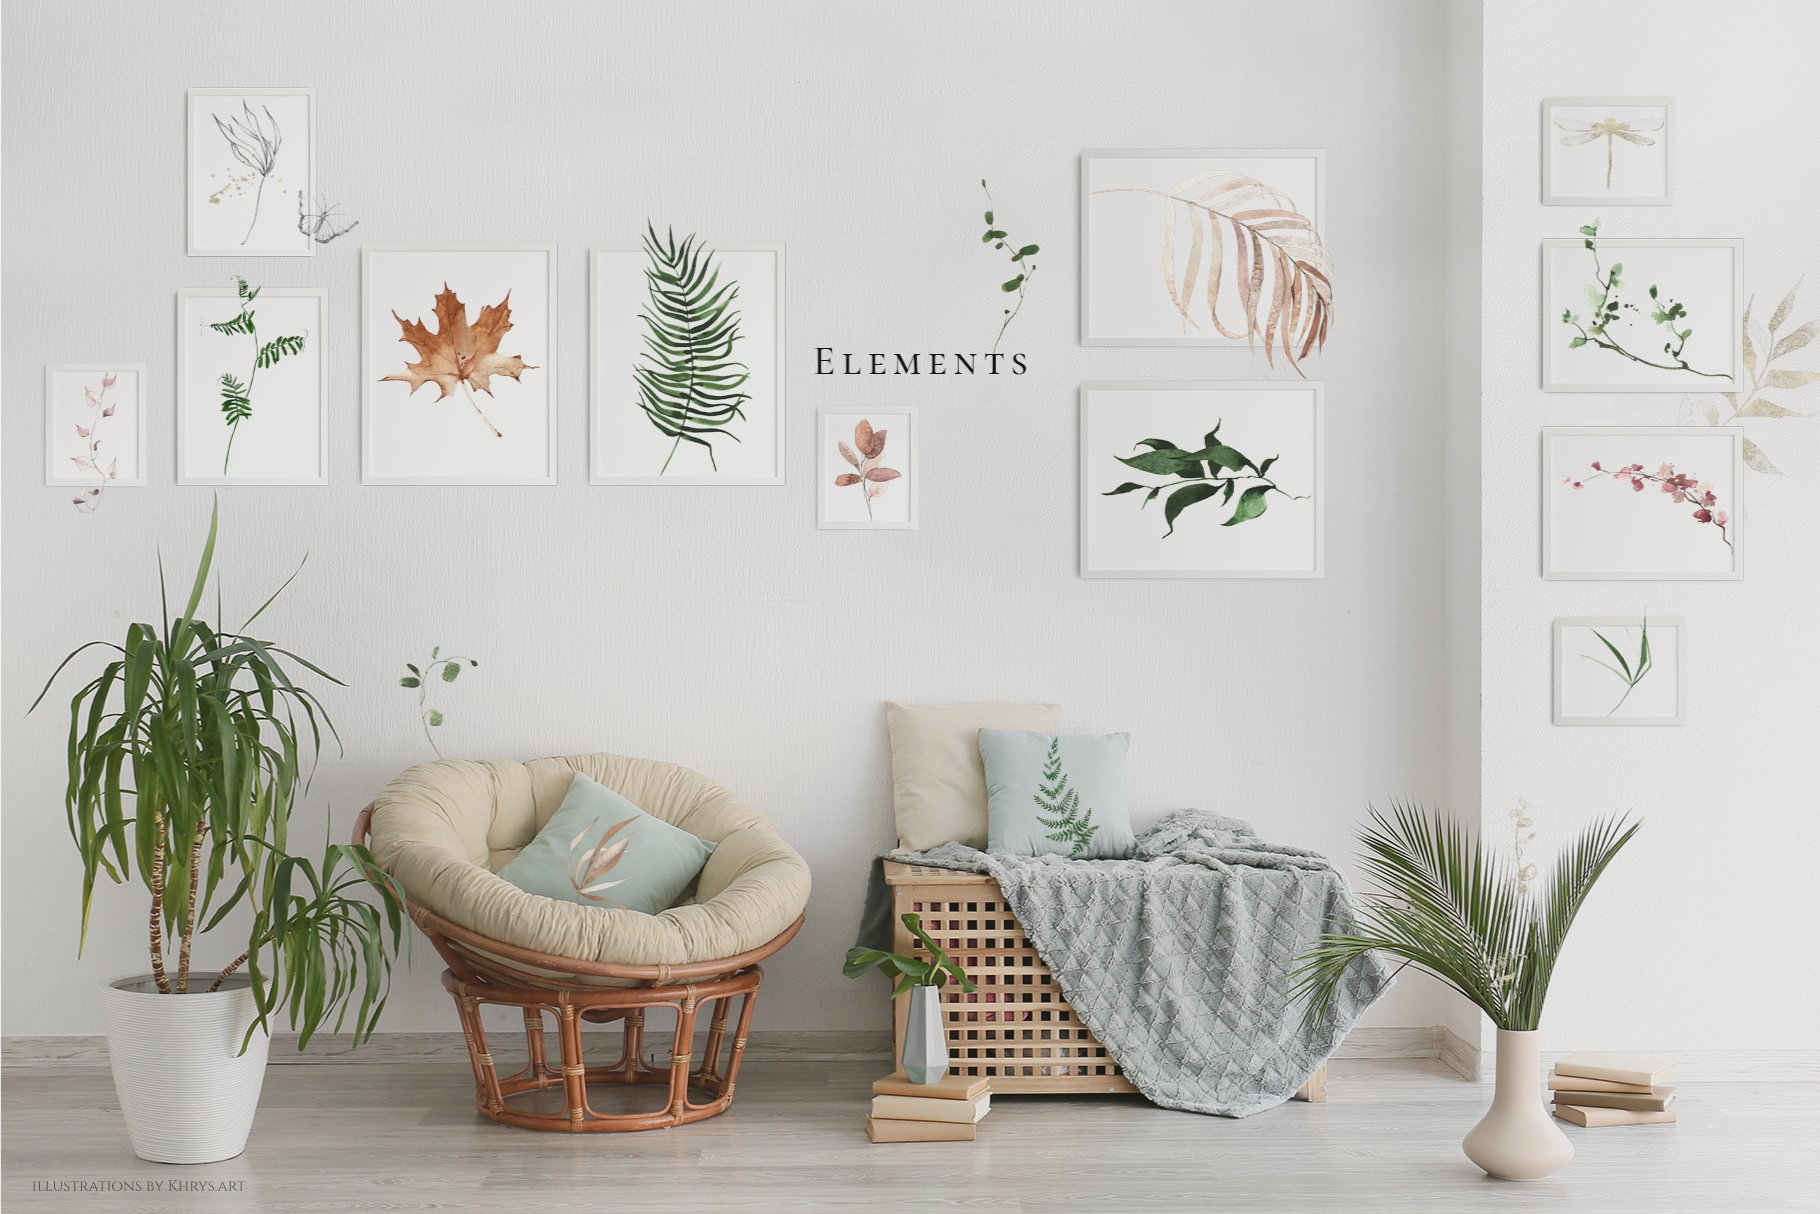 Living room with plants and pictures on the wall.